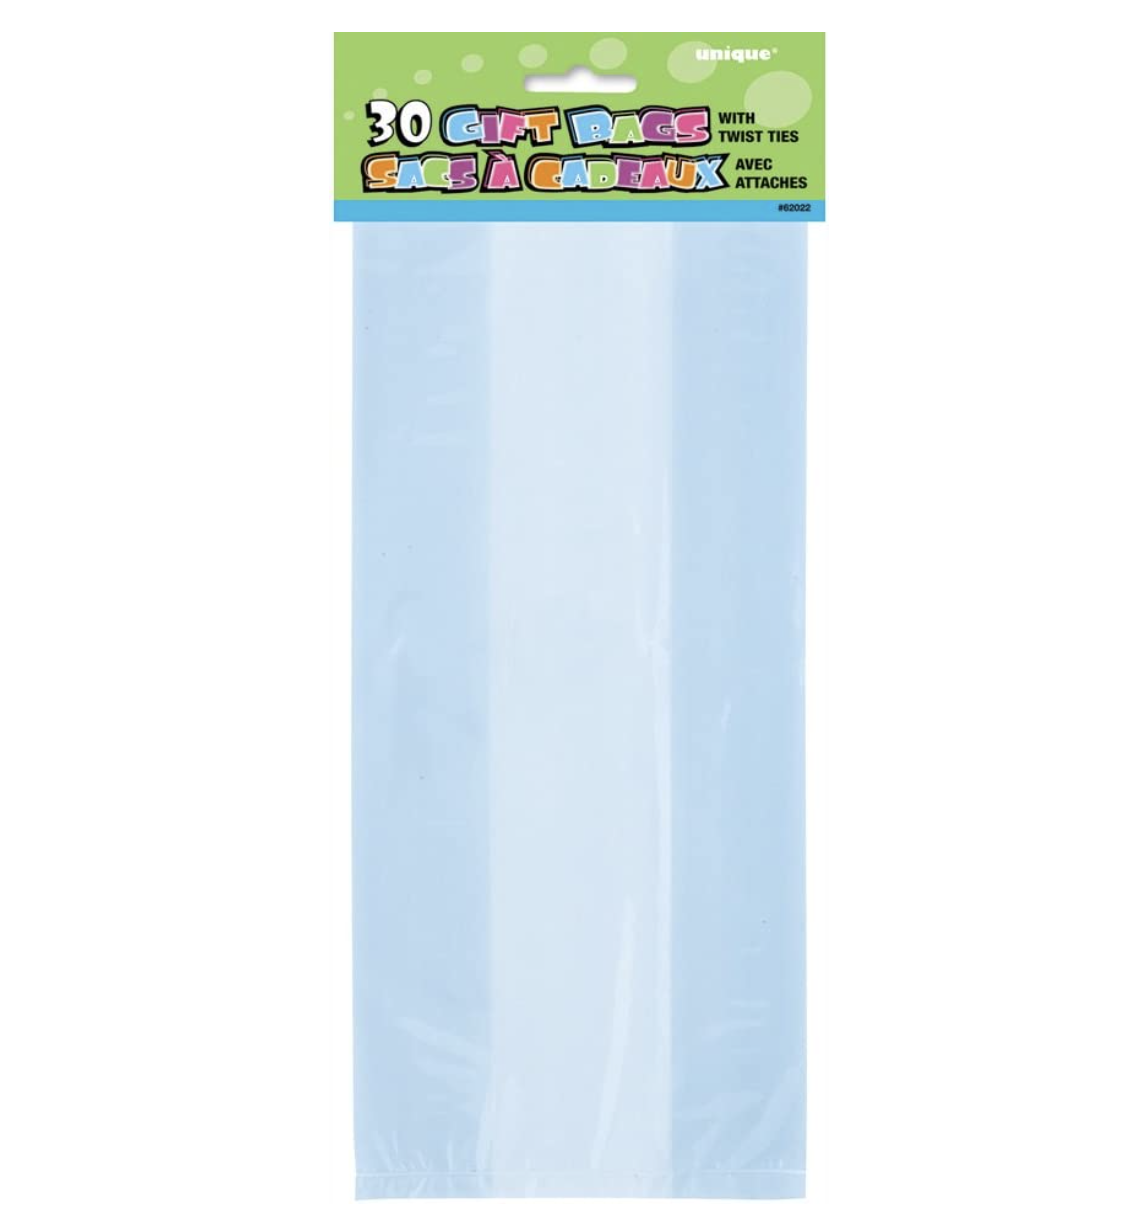 Baby blue  Cellophane Bags 30ct